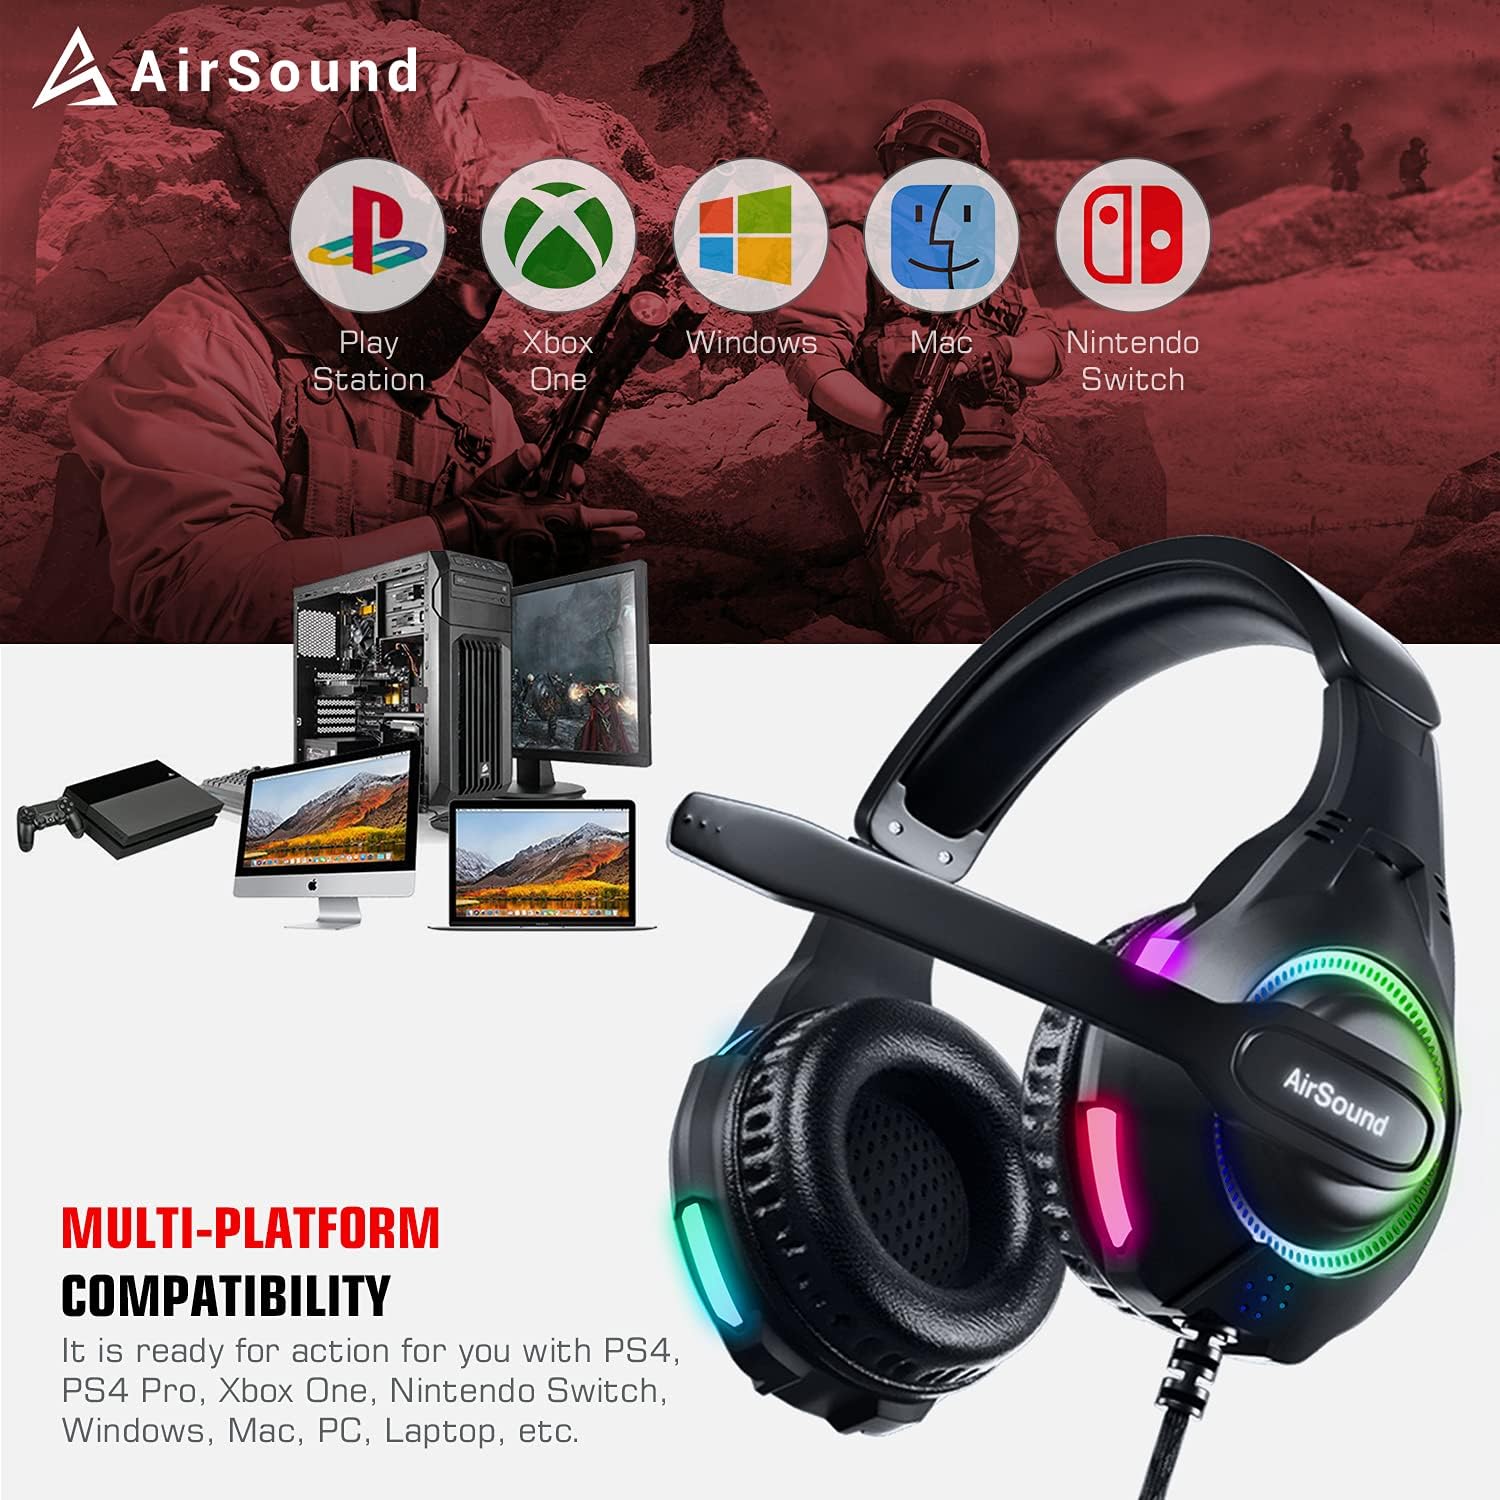 Airsound Alpha-5 Stereo Gaming Headset For Ps4 Pc Xbox One Ps5 Controller, Noise Cancelling Over-Ear Headphones With Mic, Rbg Led, Bass Surround, Soft Memory Earmuffs For Laptop Mac Nintendo Nes Games